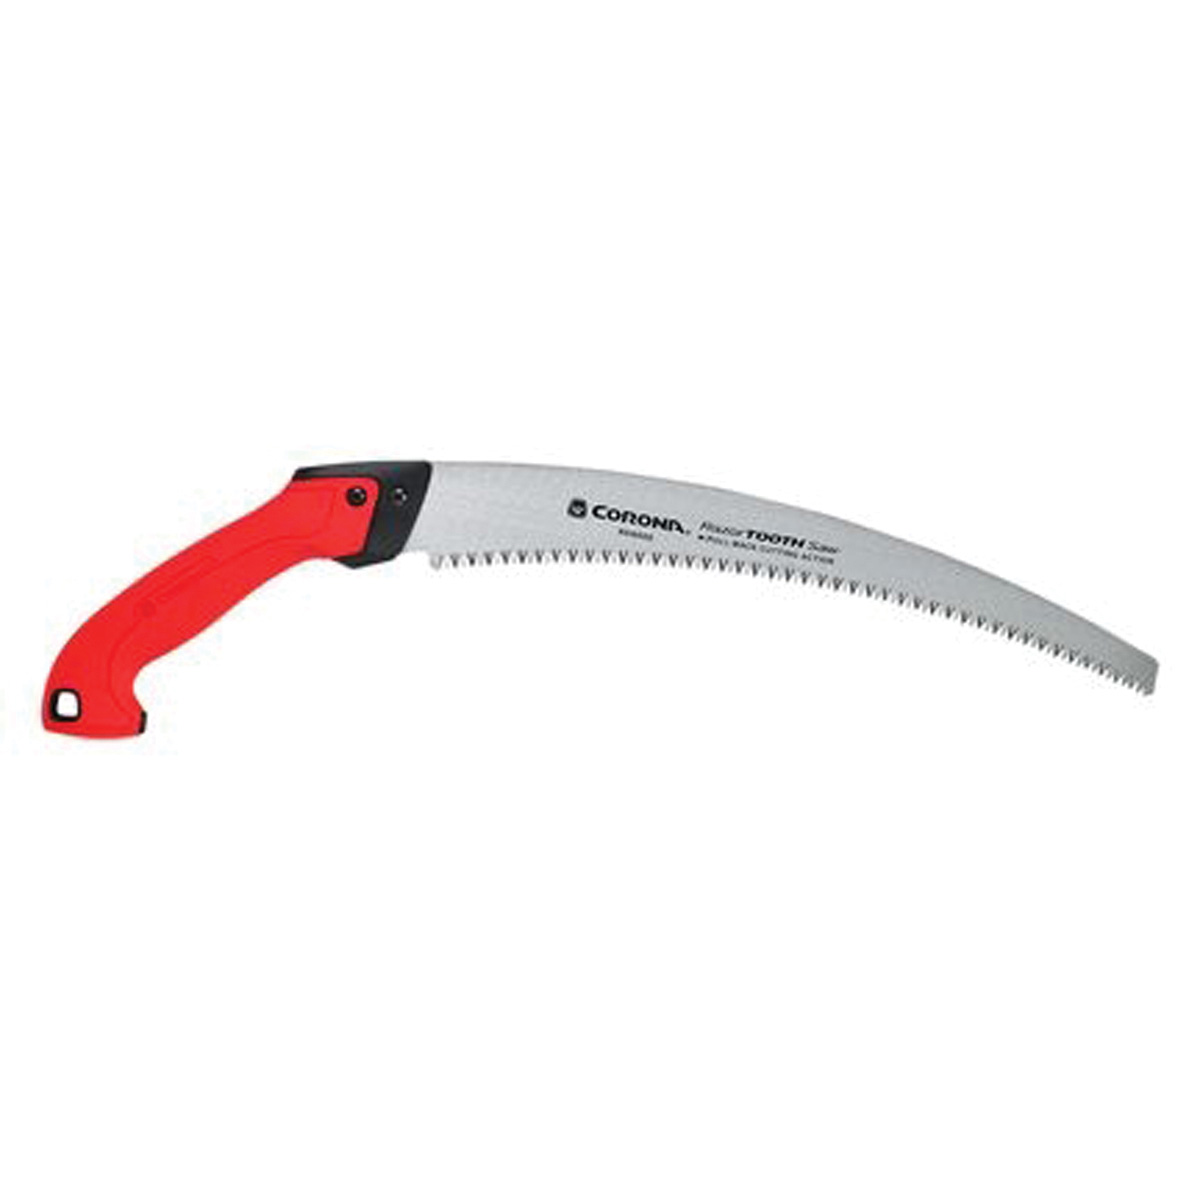 RS16020 Curved Pruning Saw, 14 in Blade, SK5 Steel Blade, 6 TPI, Rubber Handle, Non-Slip Handle